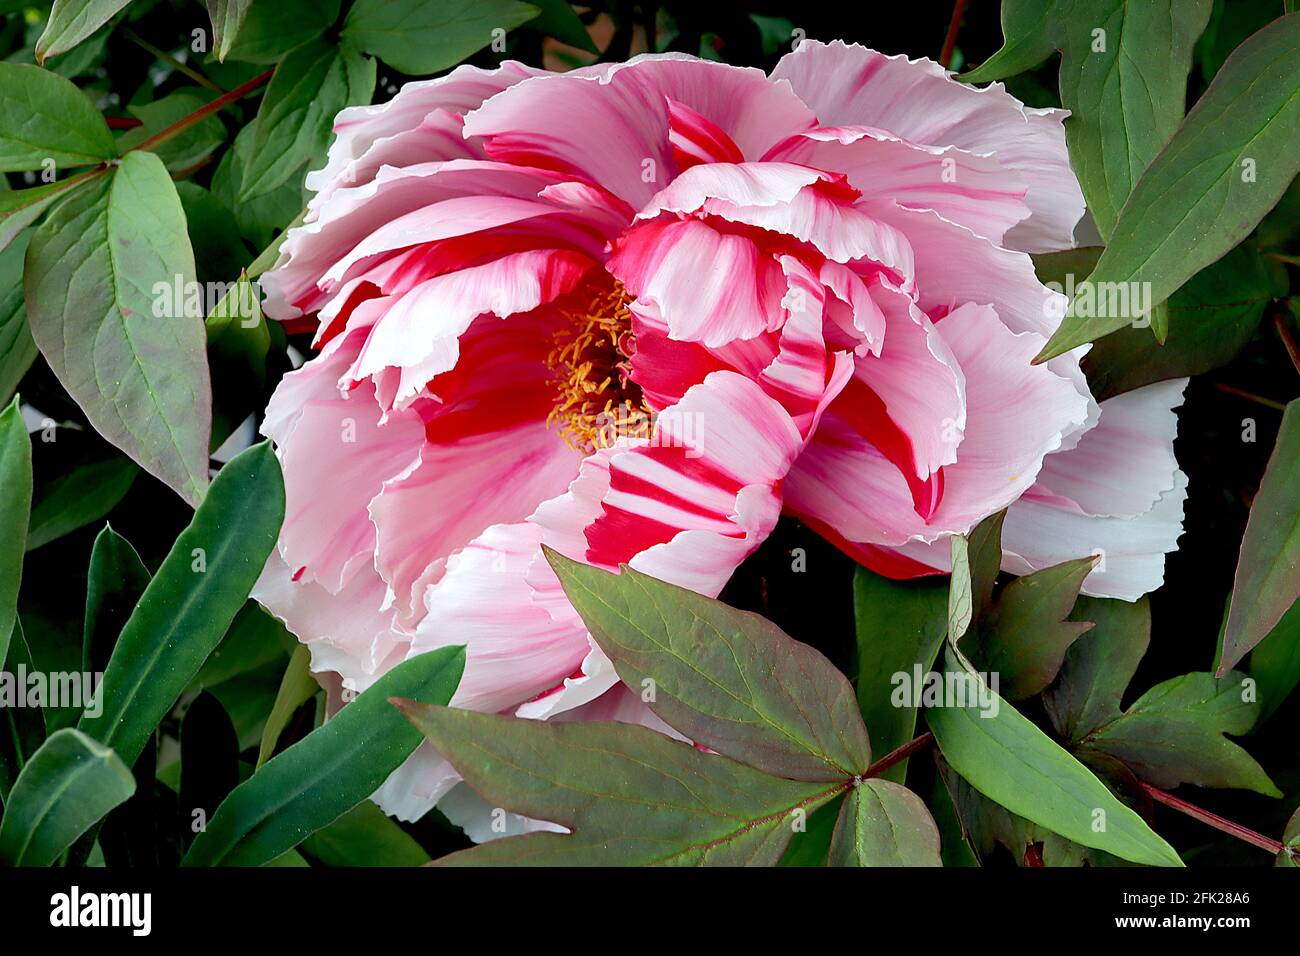 Paeonia lactiflora ‘Candy Stripe’ Peony Candy Stripe – huge double white flowers with pink and red stripes,  April, England, UK Stock Photo